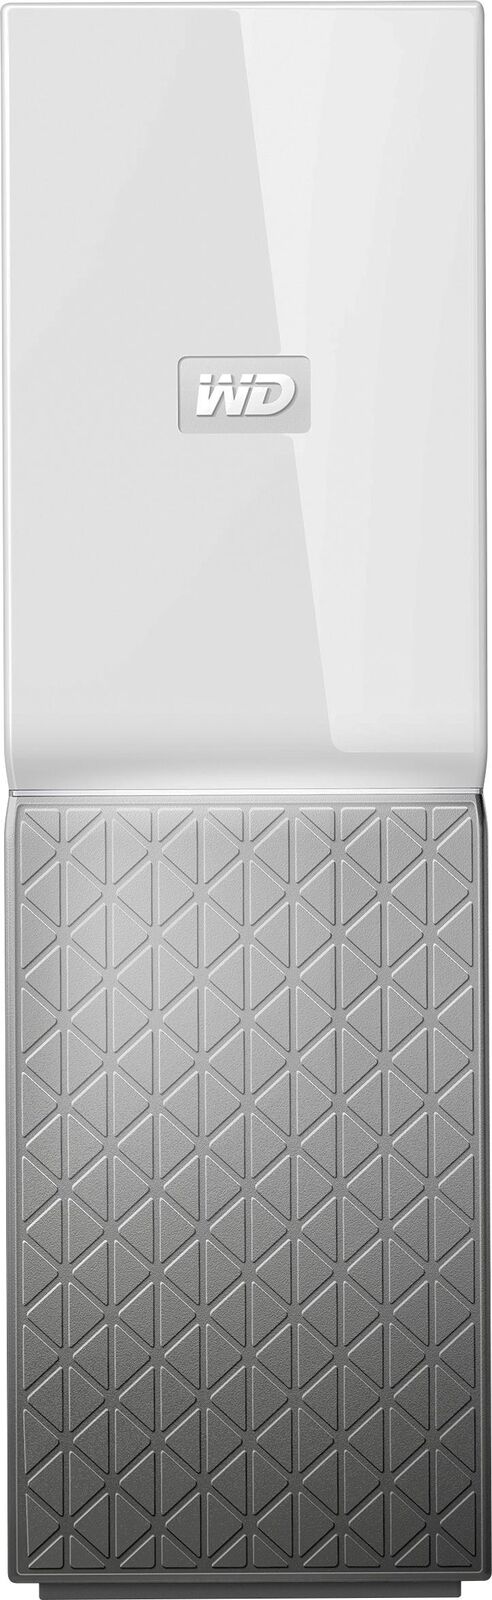 WD - My Cloud Home 4TB Personal Cloud - White